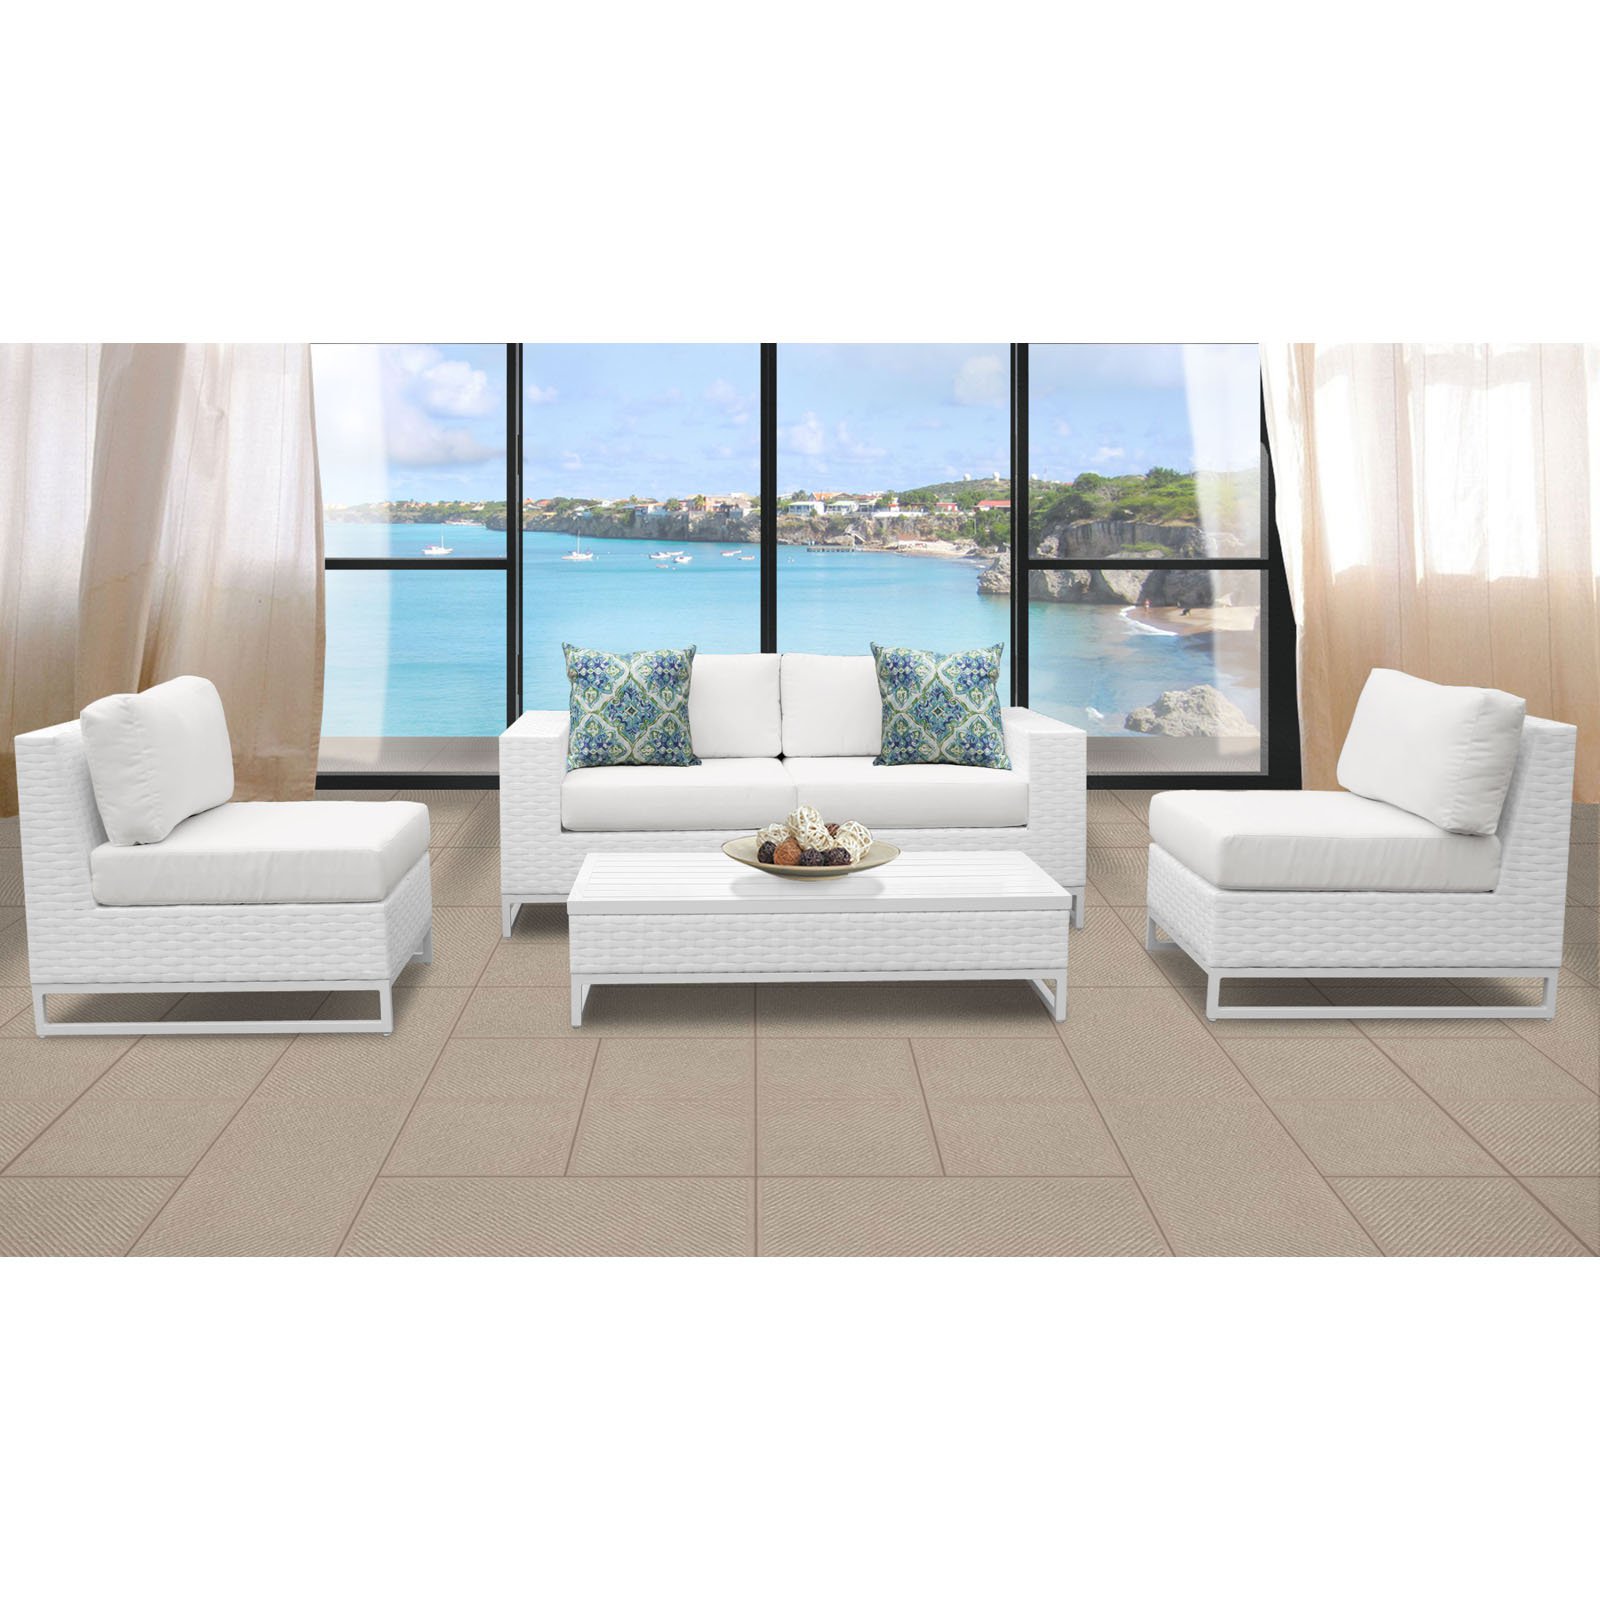 TK Classics Miami Wicker 5 Piece Patio Conversation Set with Armless Chairs - image 3 of 3